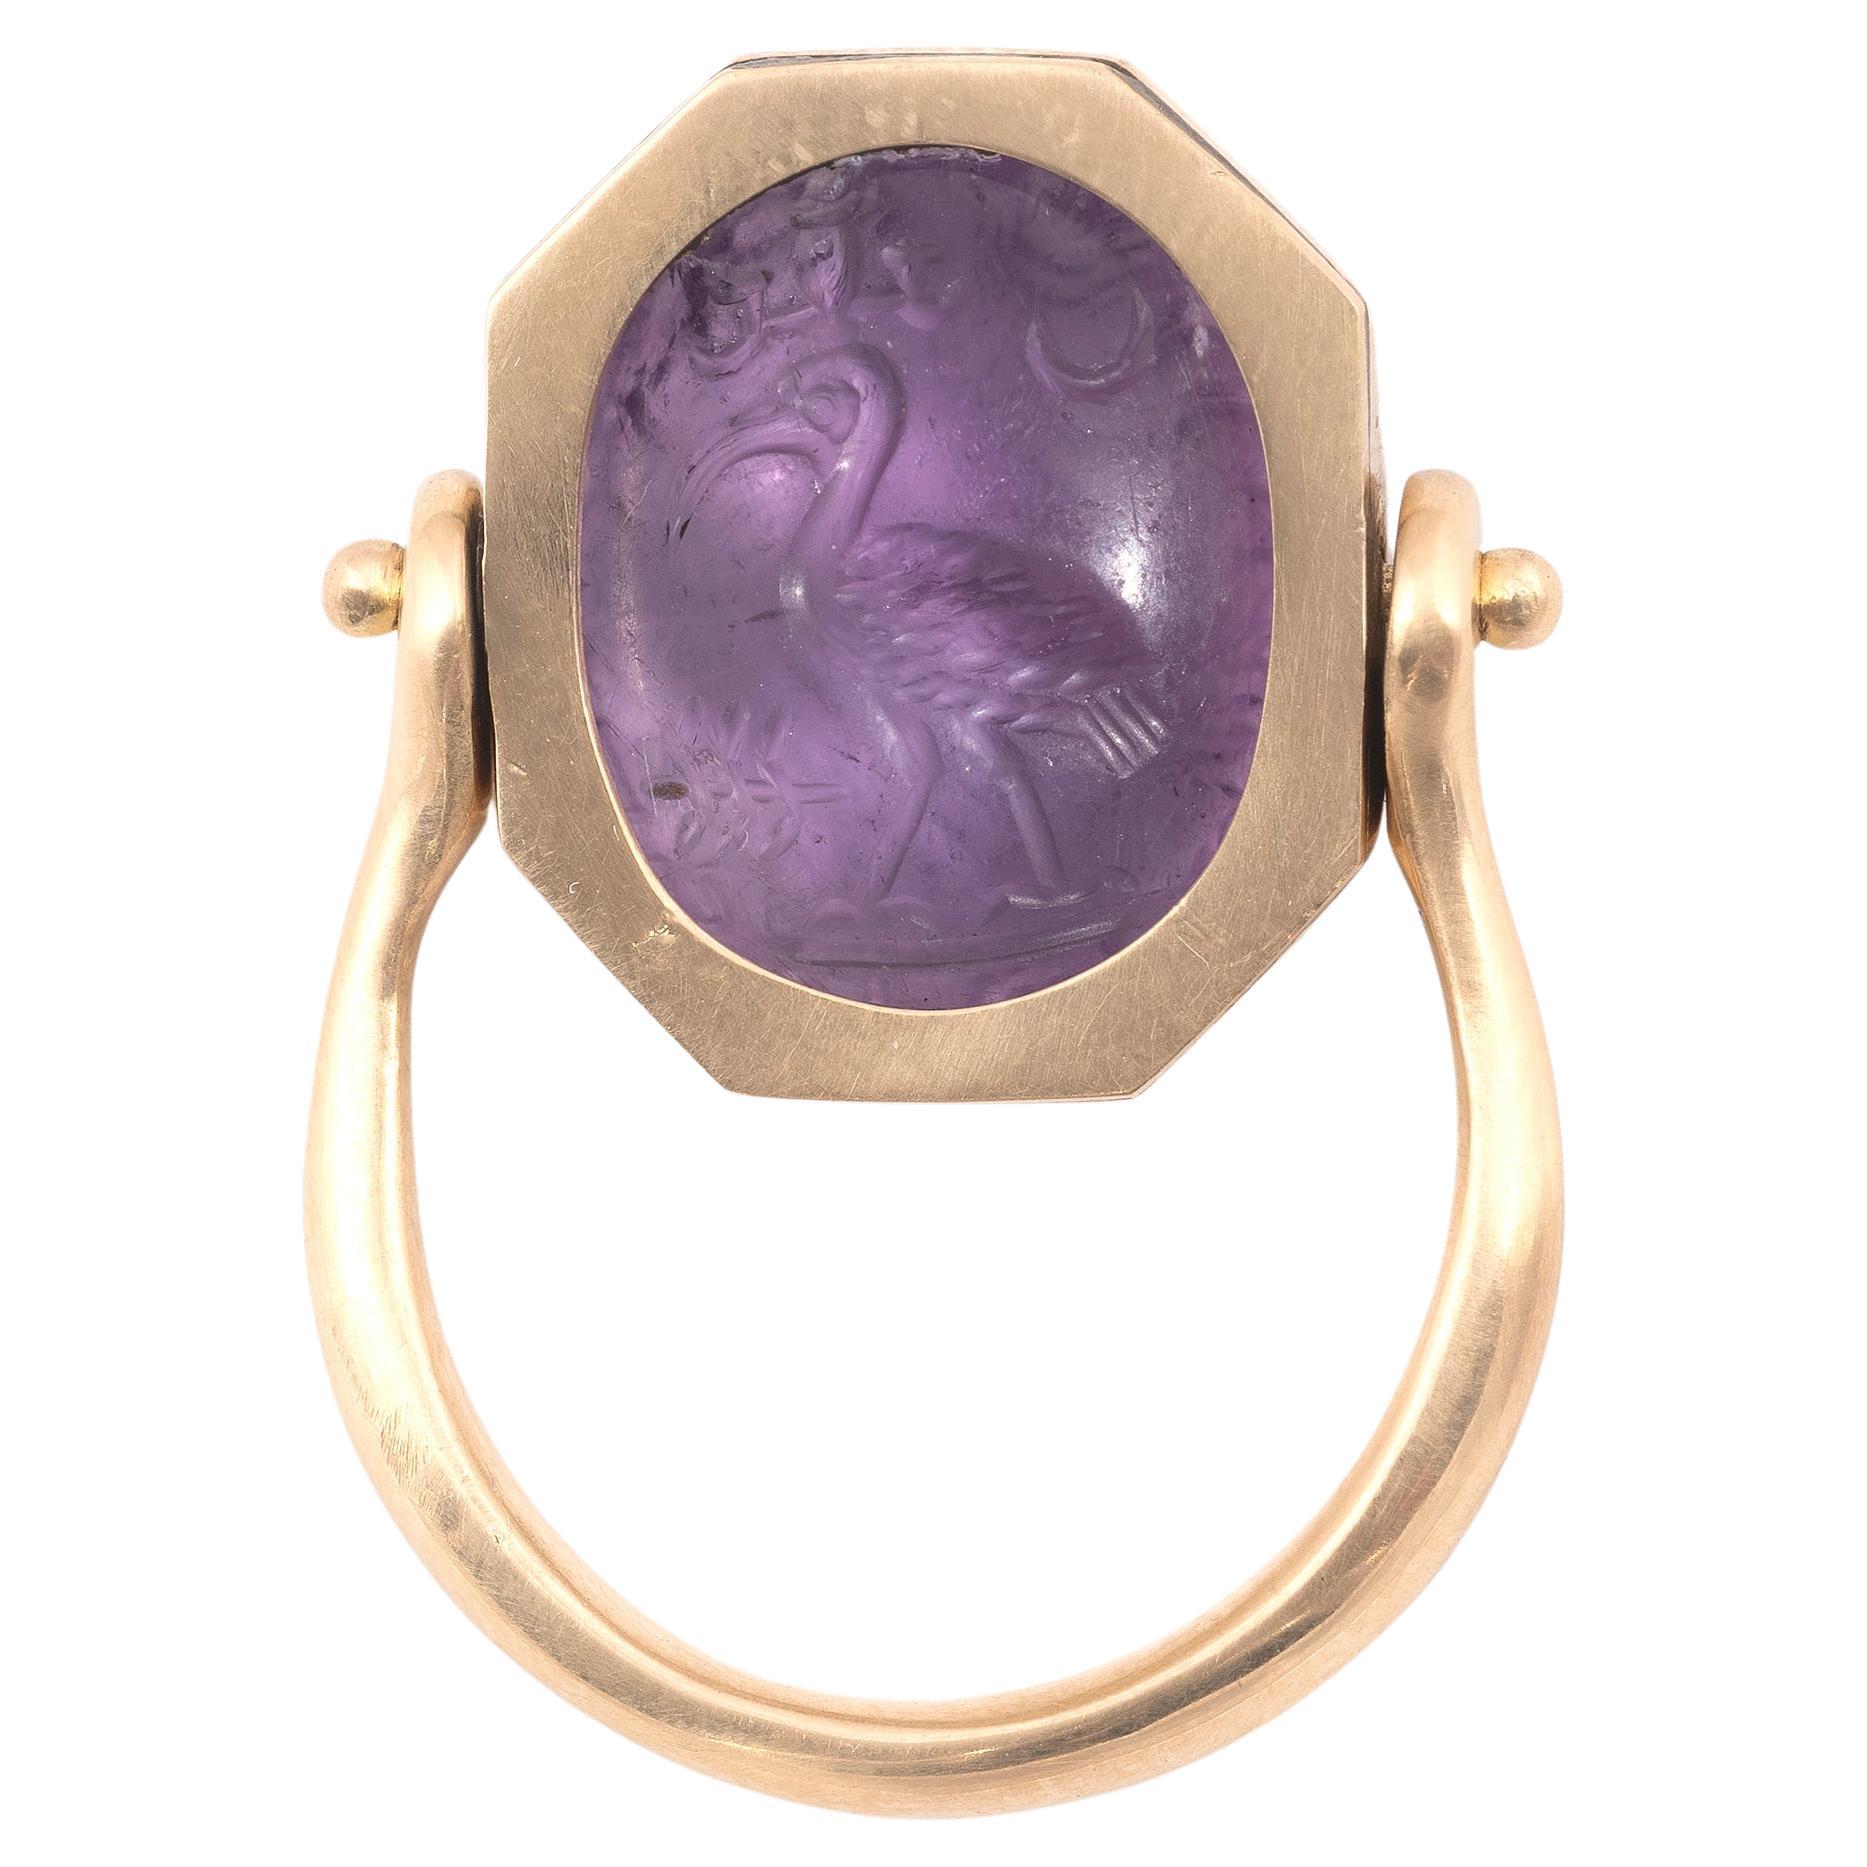 Classical Roman An Amethyst Intaglio Magical In Gold Ring Roman 3rd Century AD For Sale